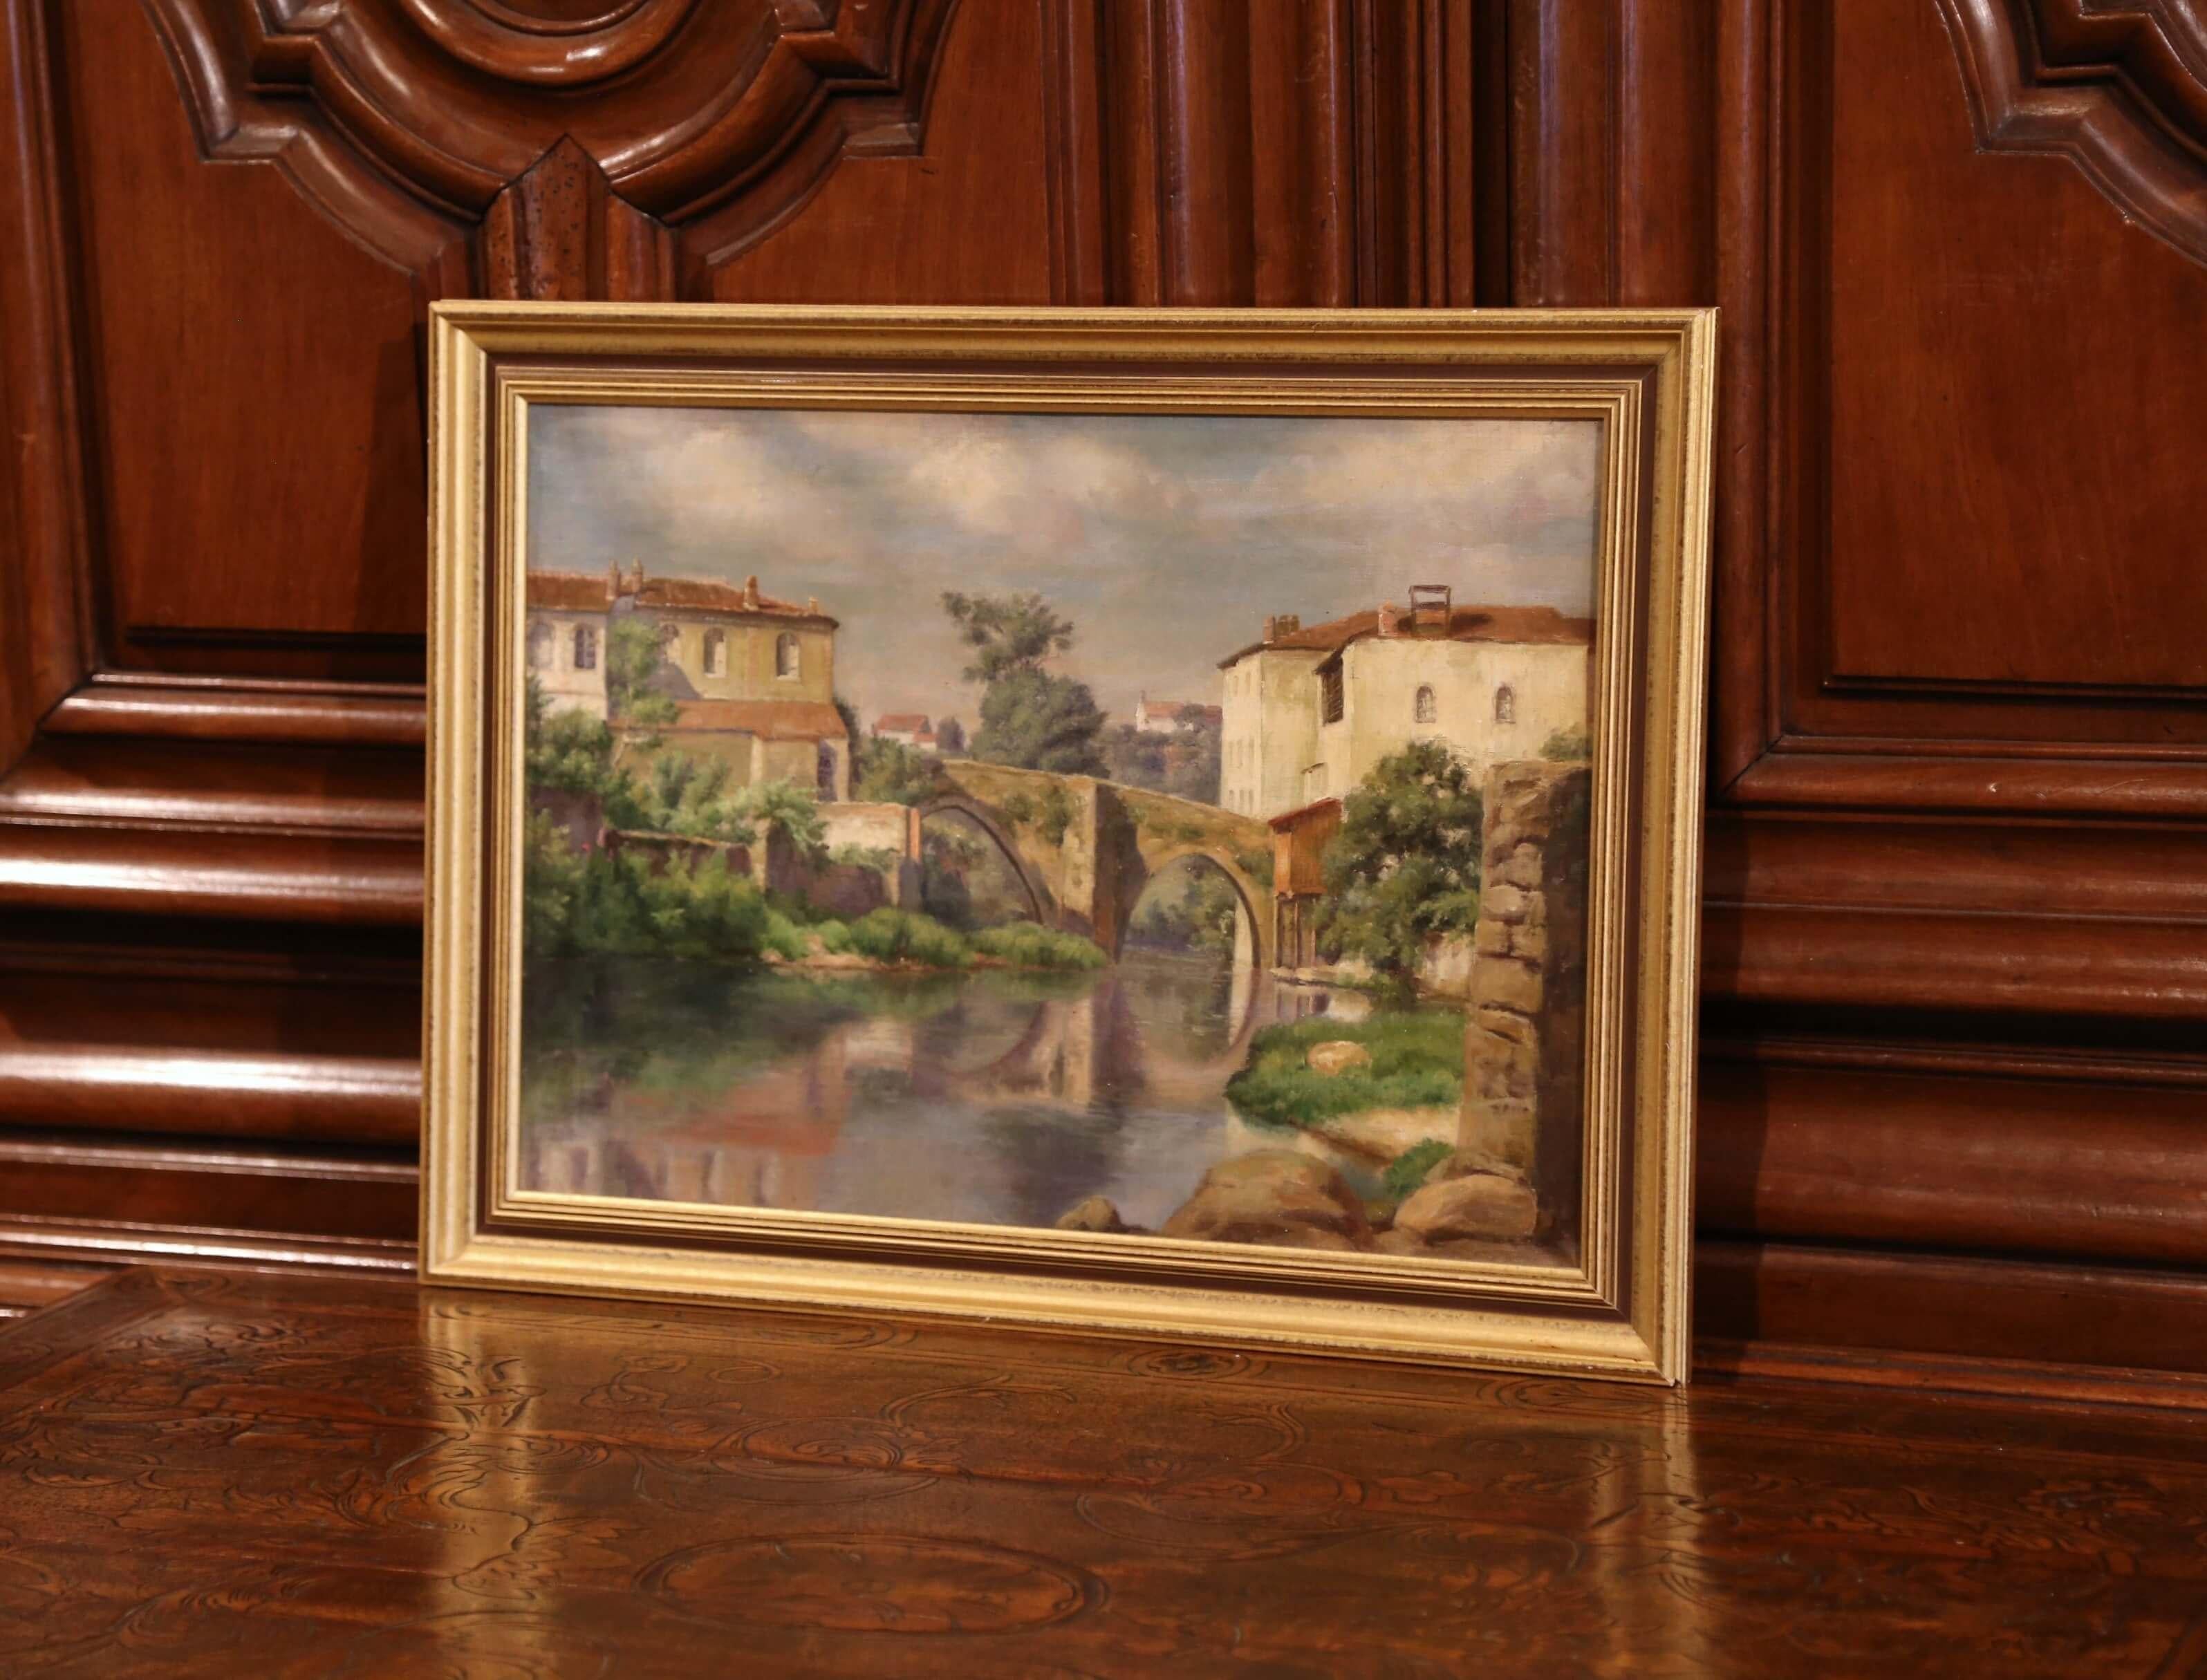 Set in a giltwood frame, the oil on canvas painting depicts a typical Provençal village with 